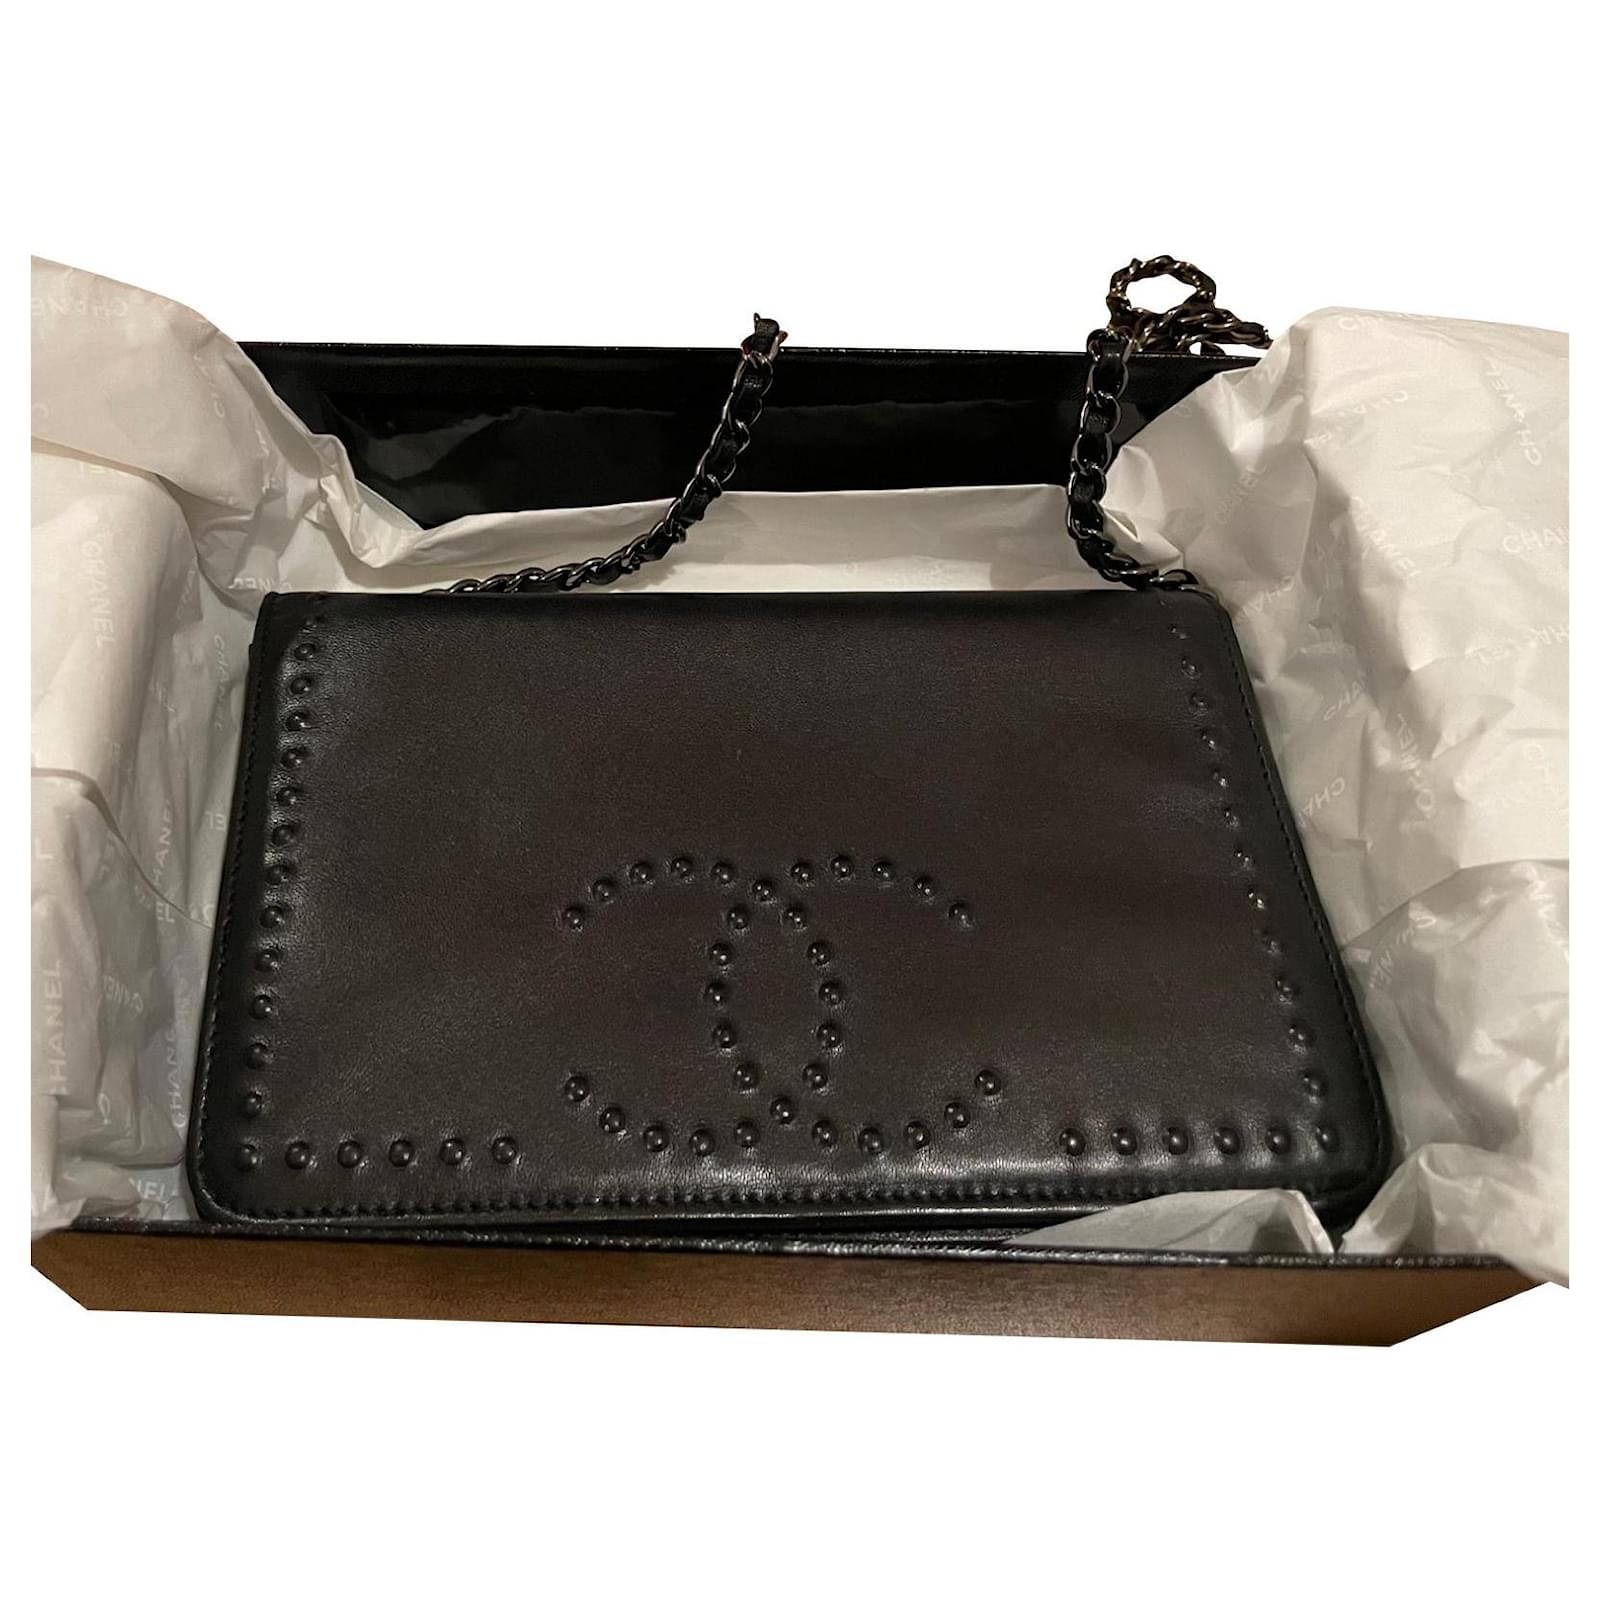 Chanel Authenticated Wallet on Chain Handbag